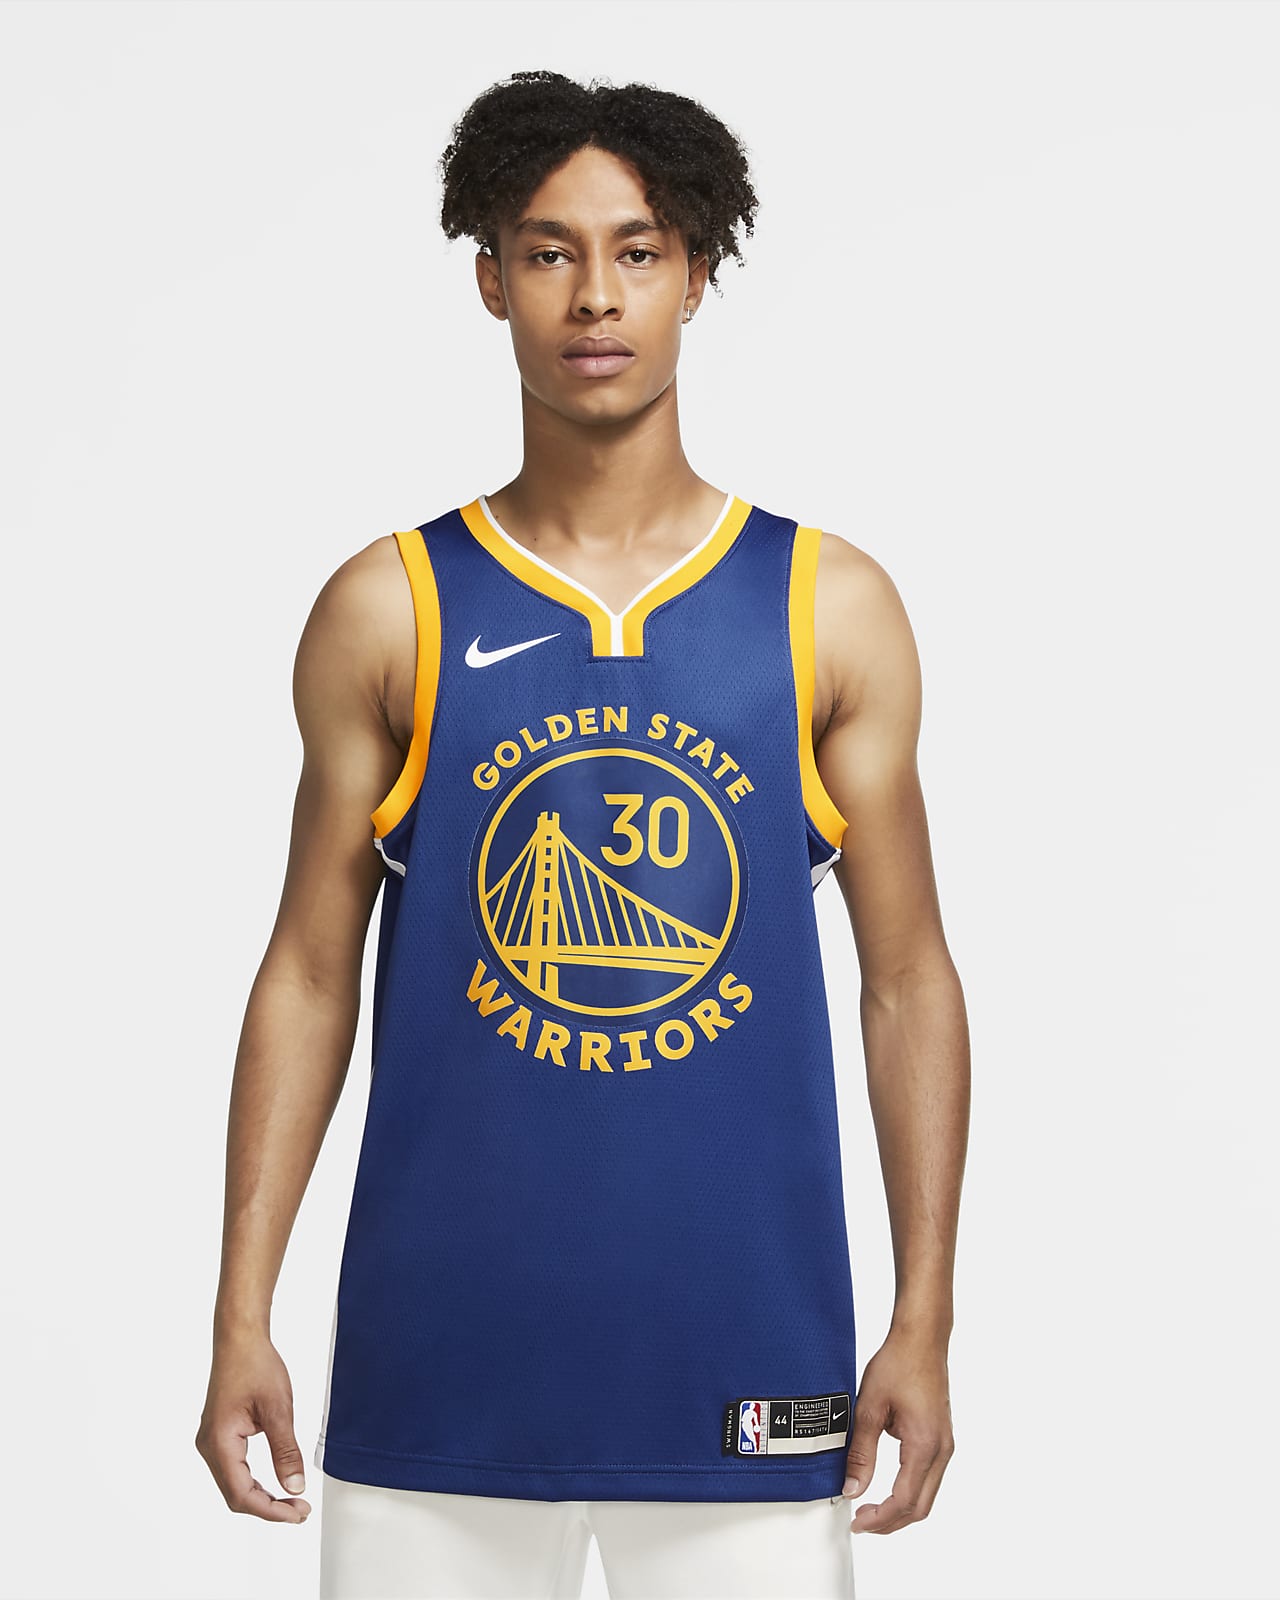 warriors curry jersey